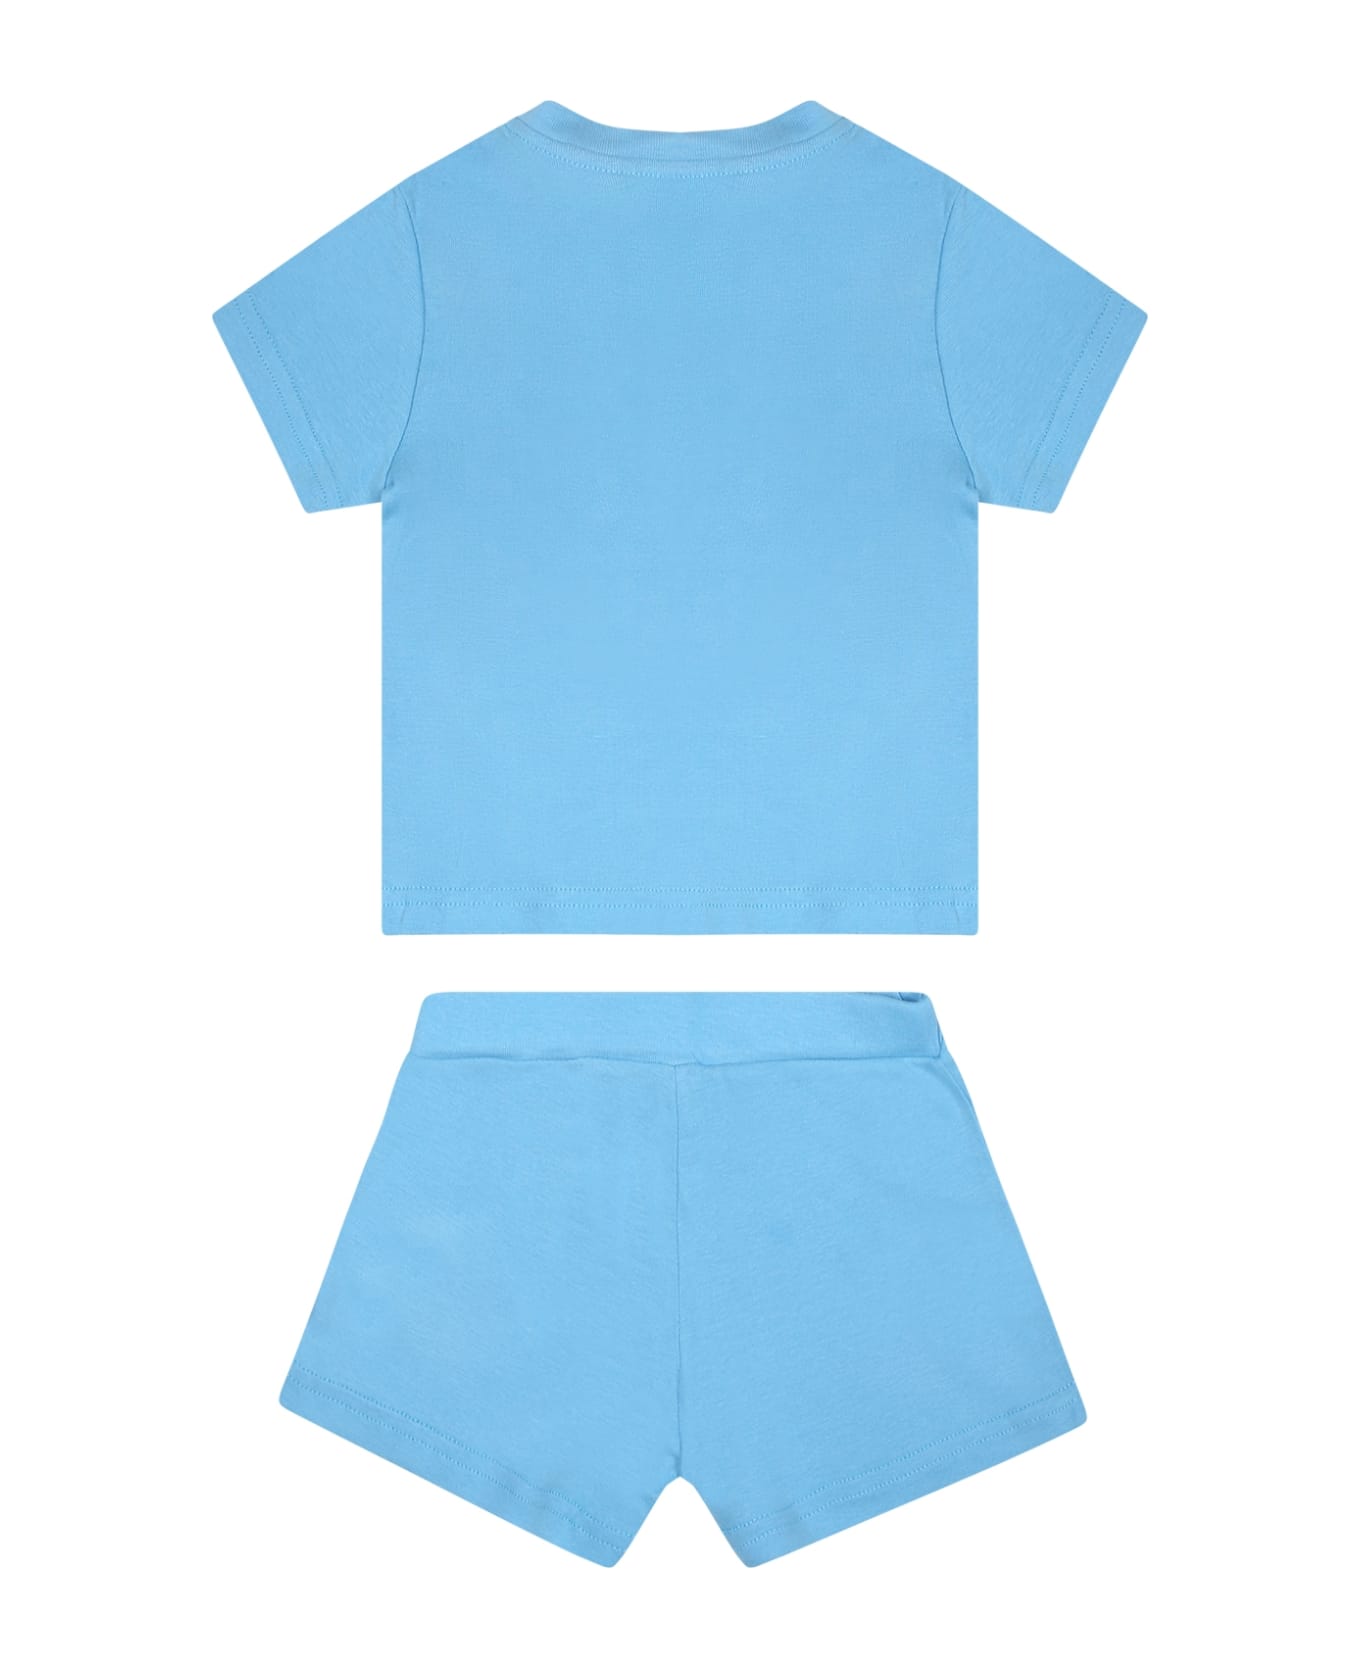 Dsquared2 Light Blue Suit For Baby Boy With Logo - Light Blue